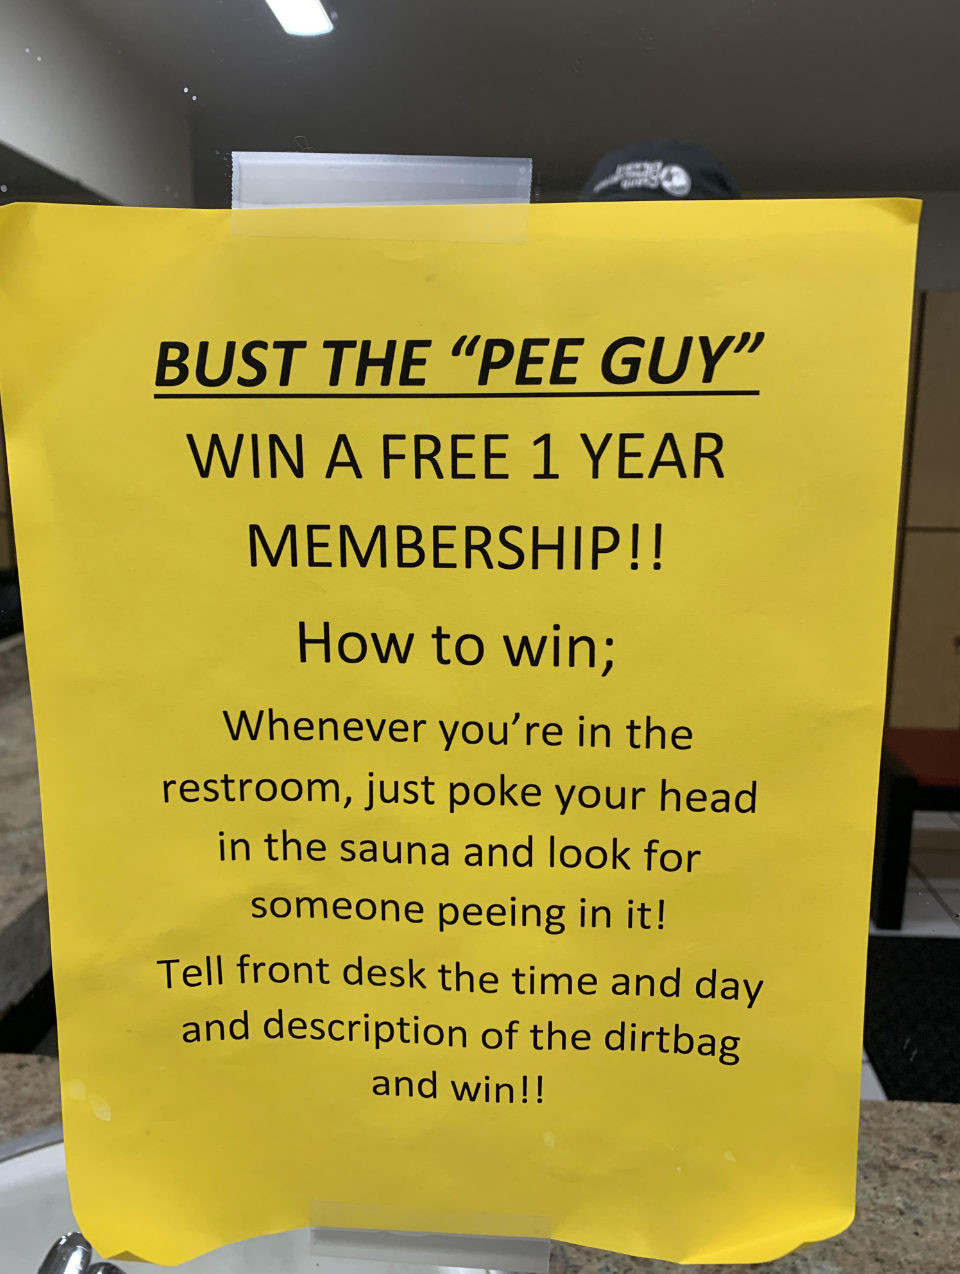 A note asking for people&#x27;s help in identifying whoever is peeing in the sauna